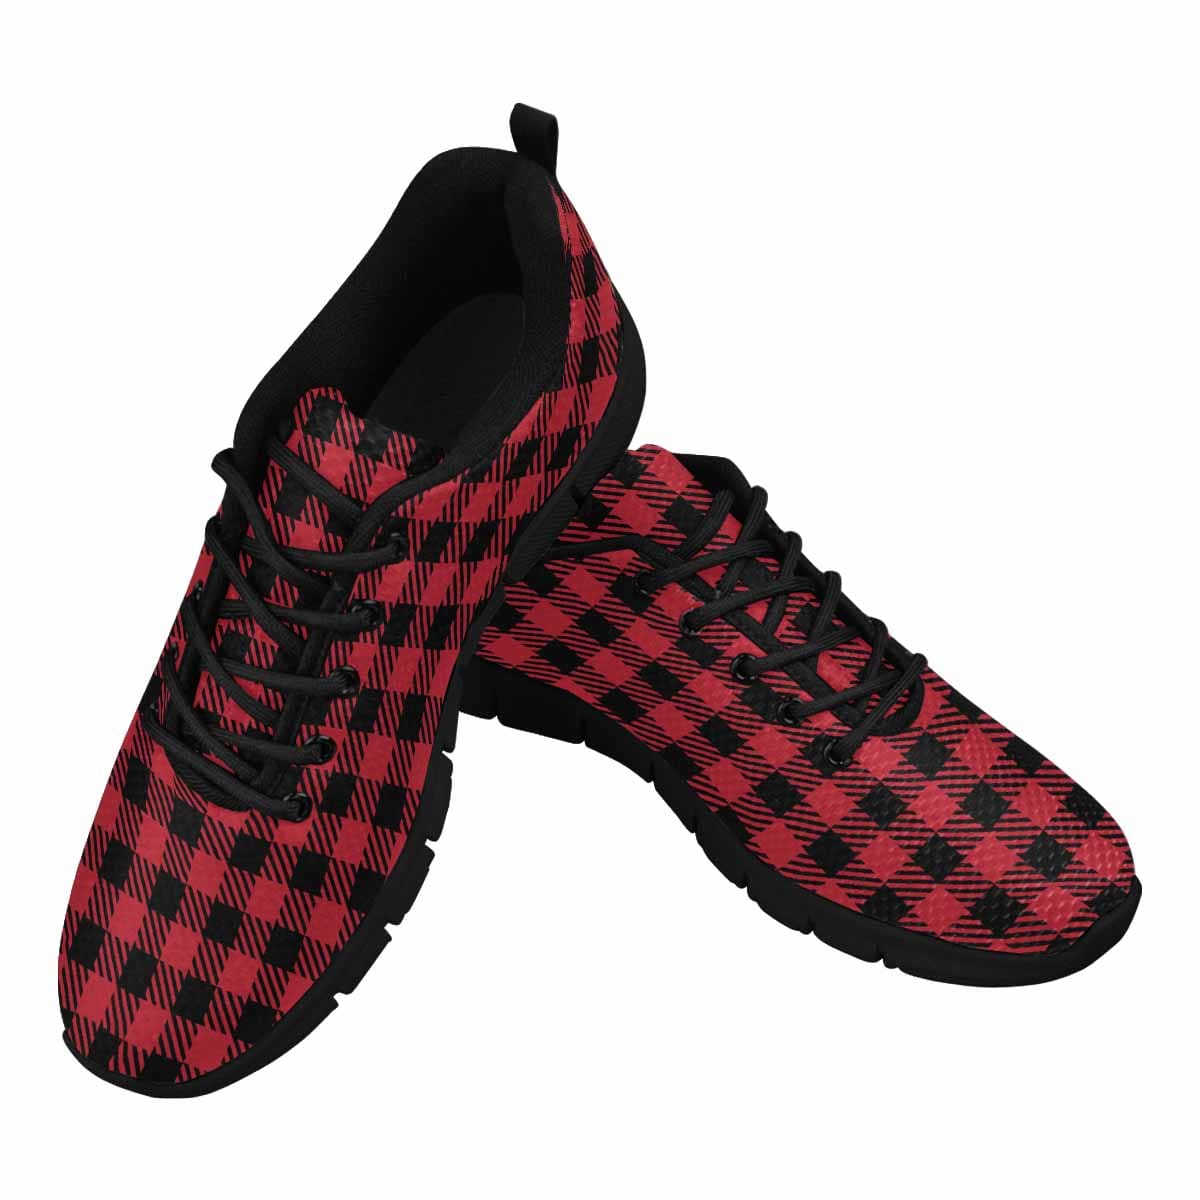 Sneakers For Men Buffalo Plaid Red And Black Running Shoes Dg852 - Mens